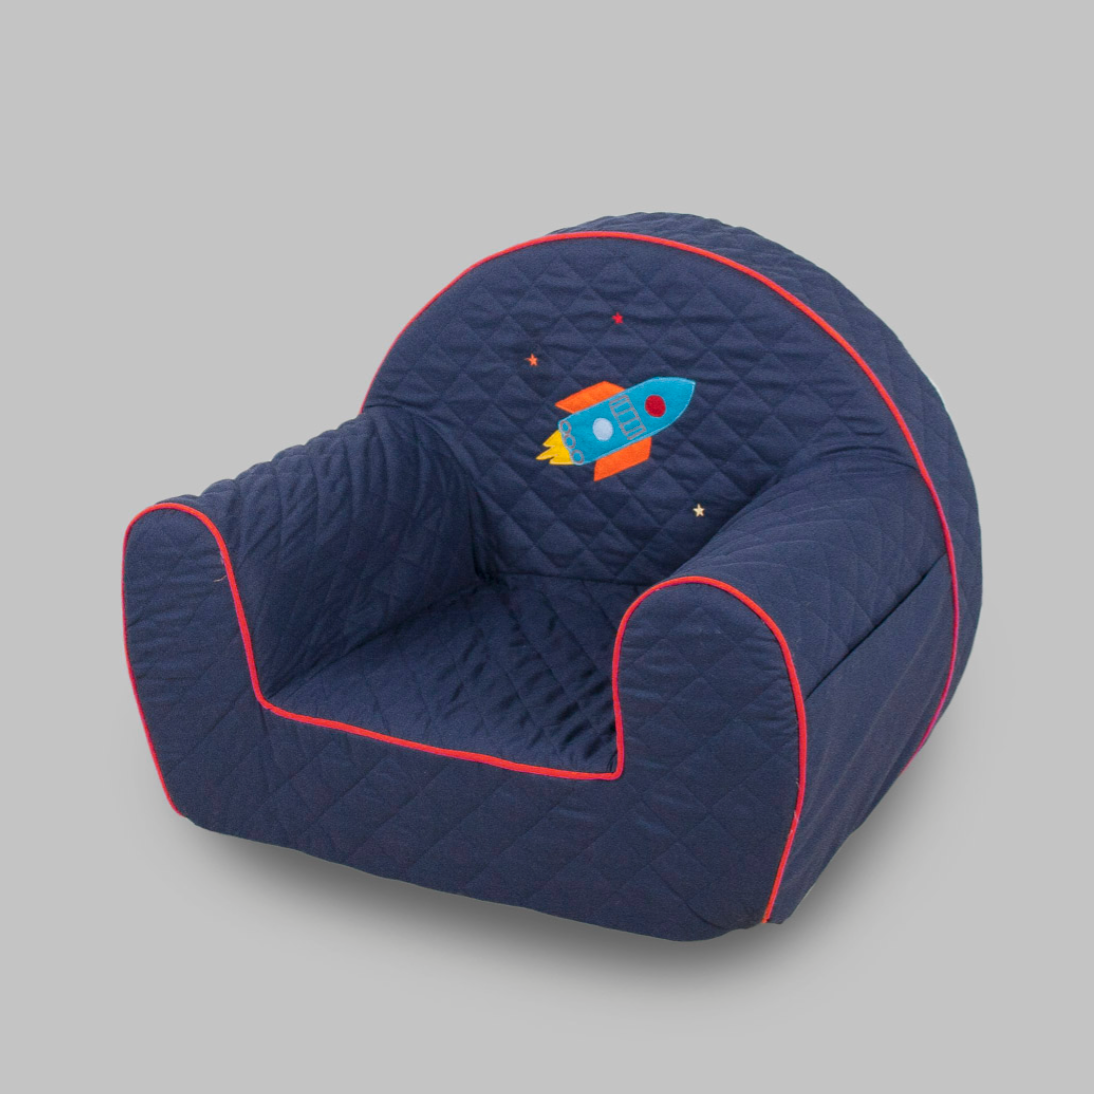 Quilted Toddler Armchair, Blue Rocket